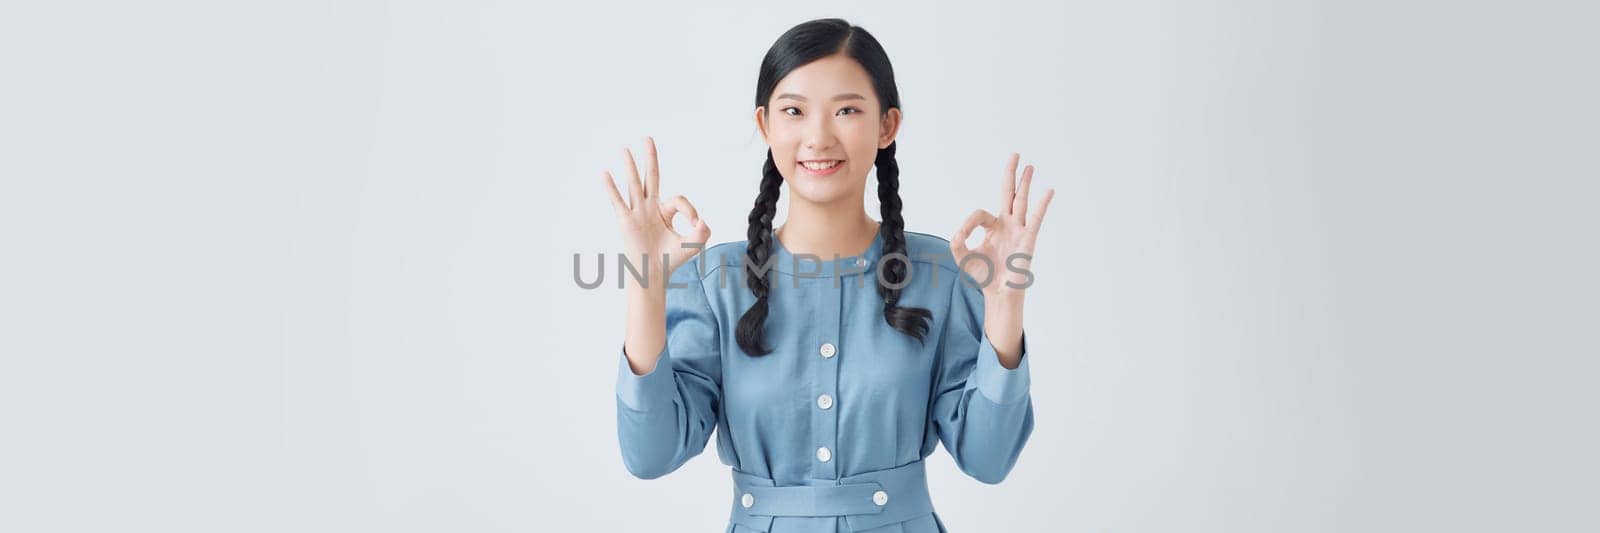 Portrait of playful woman with braids standing showing okay sign